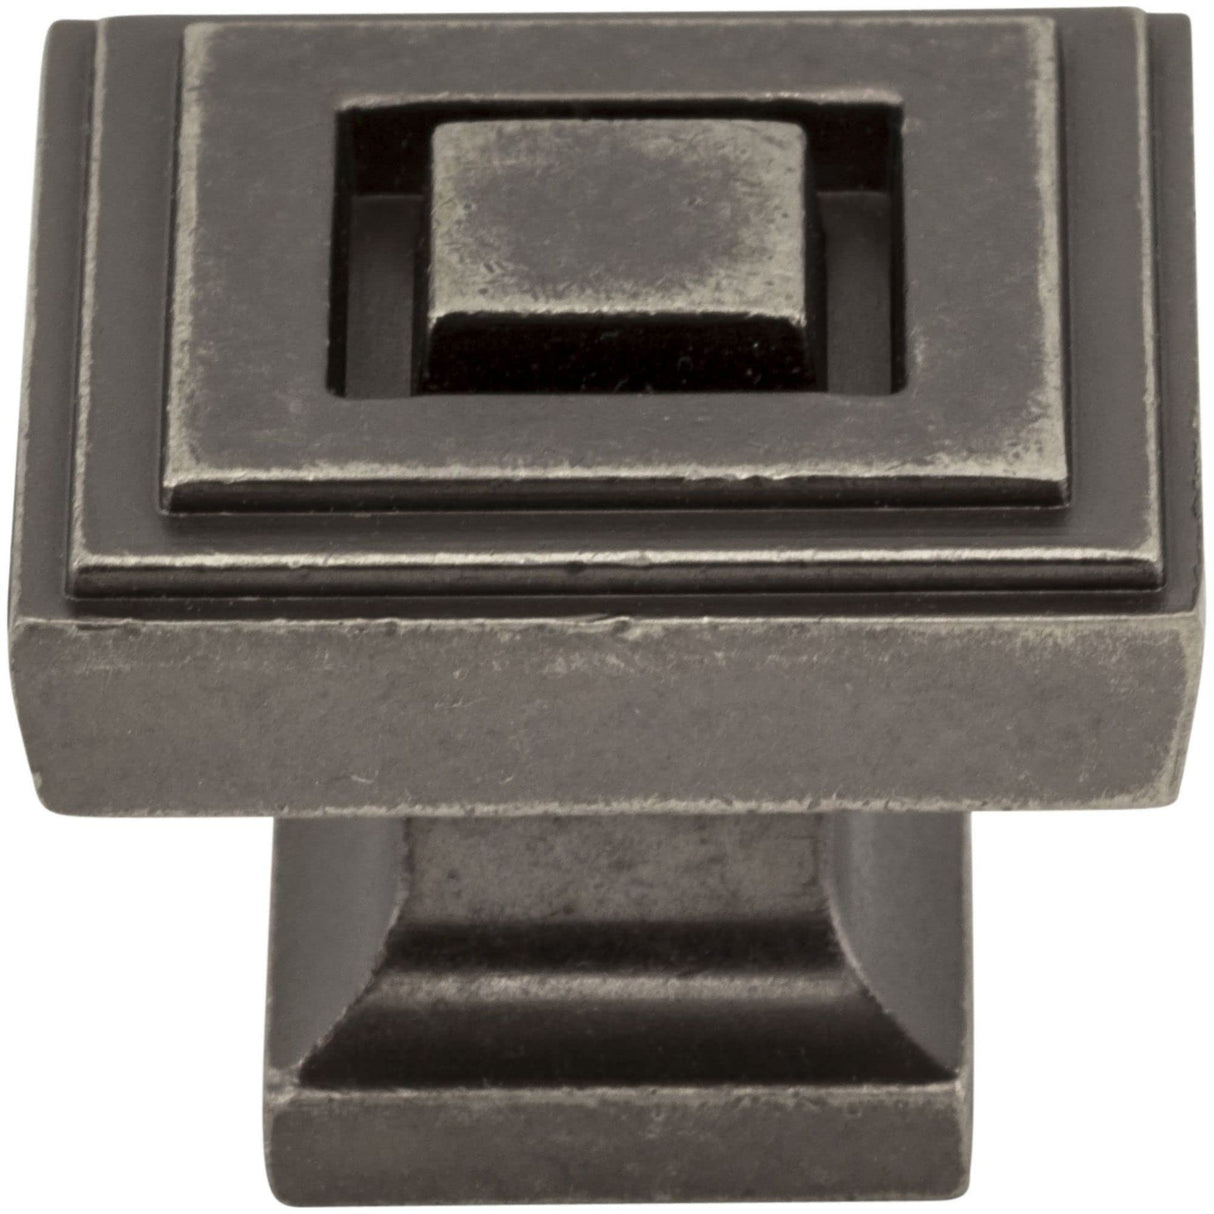 Jeffrey Alexander 585L-DP 1-1/4" Overall Length Distressed Pewter Square Delmar Cabinet Knob